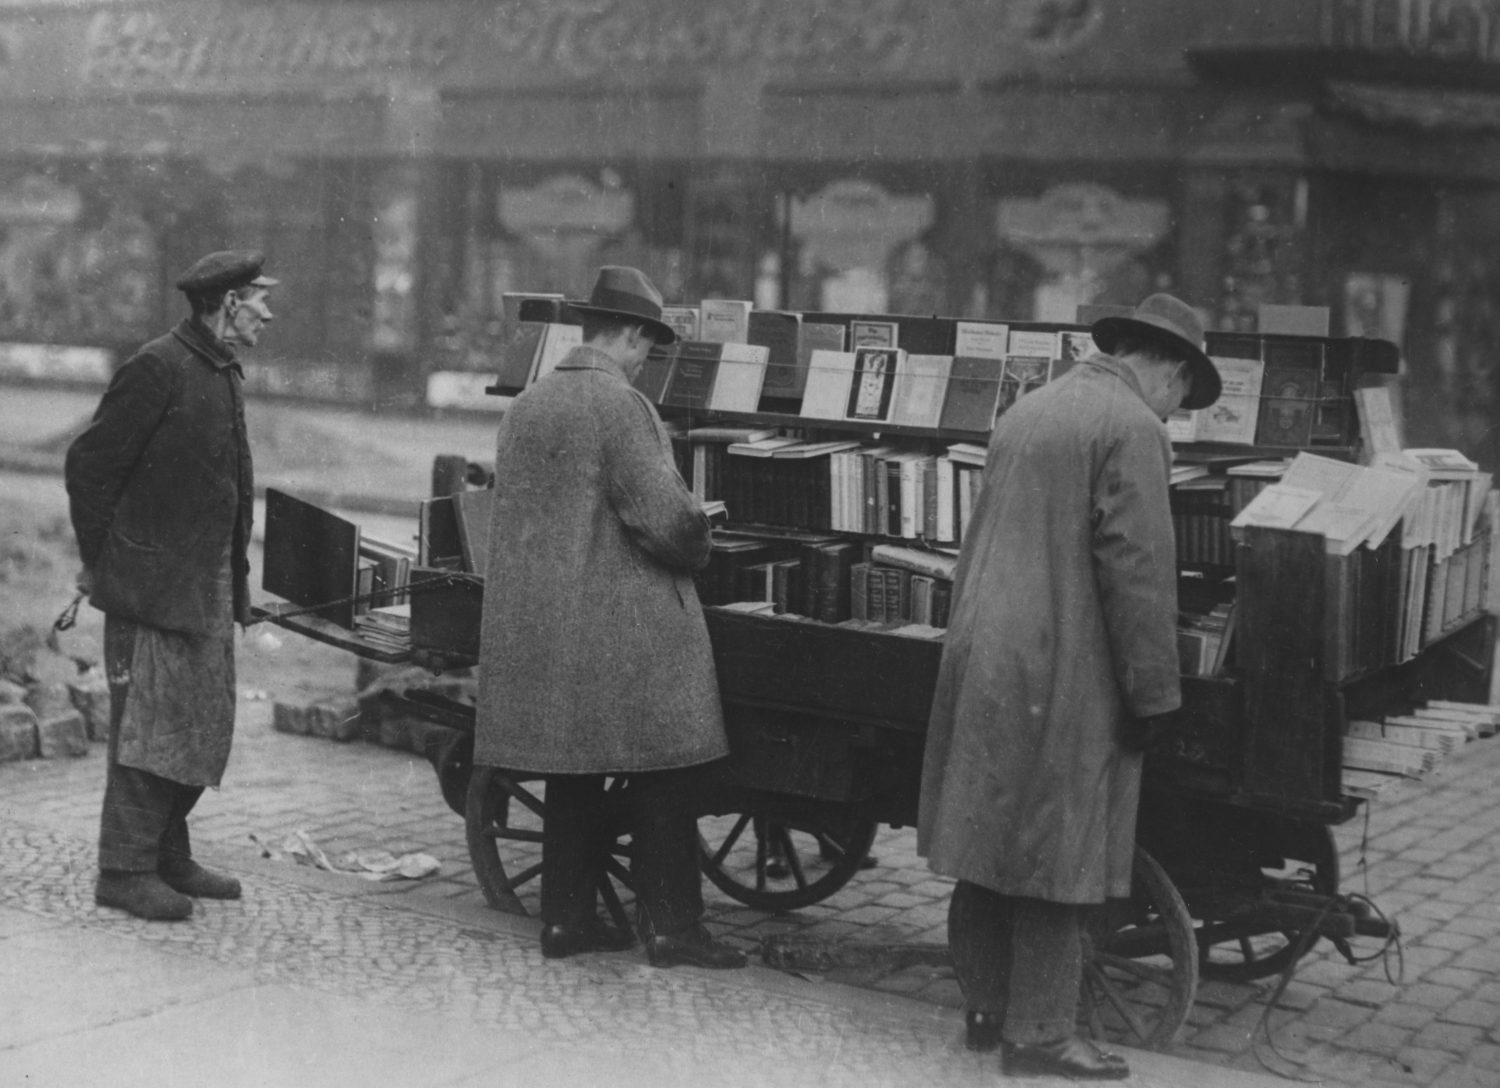 Customers browse at a mobile book stall, Berlin, circa 1925.